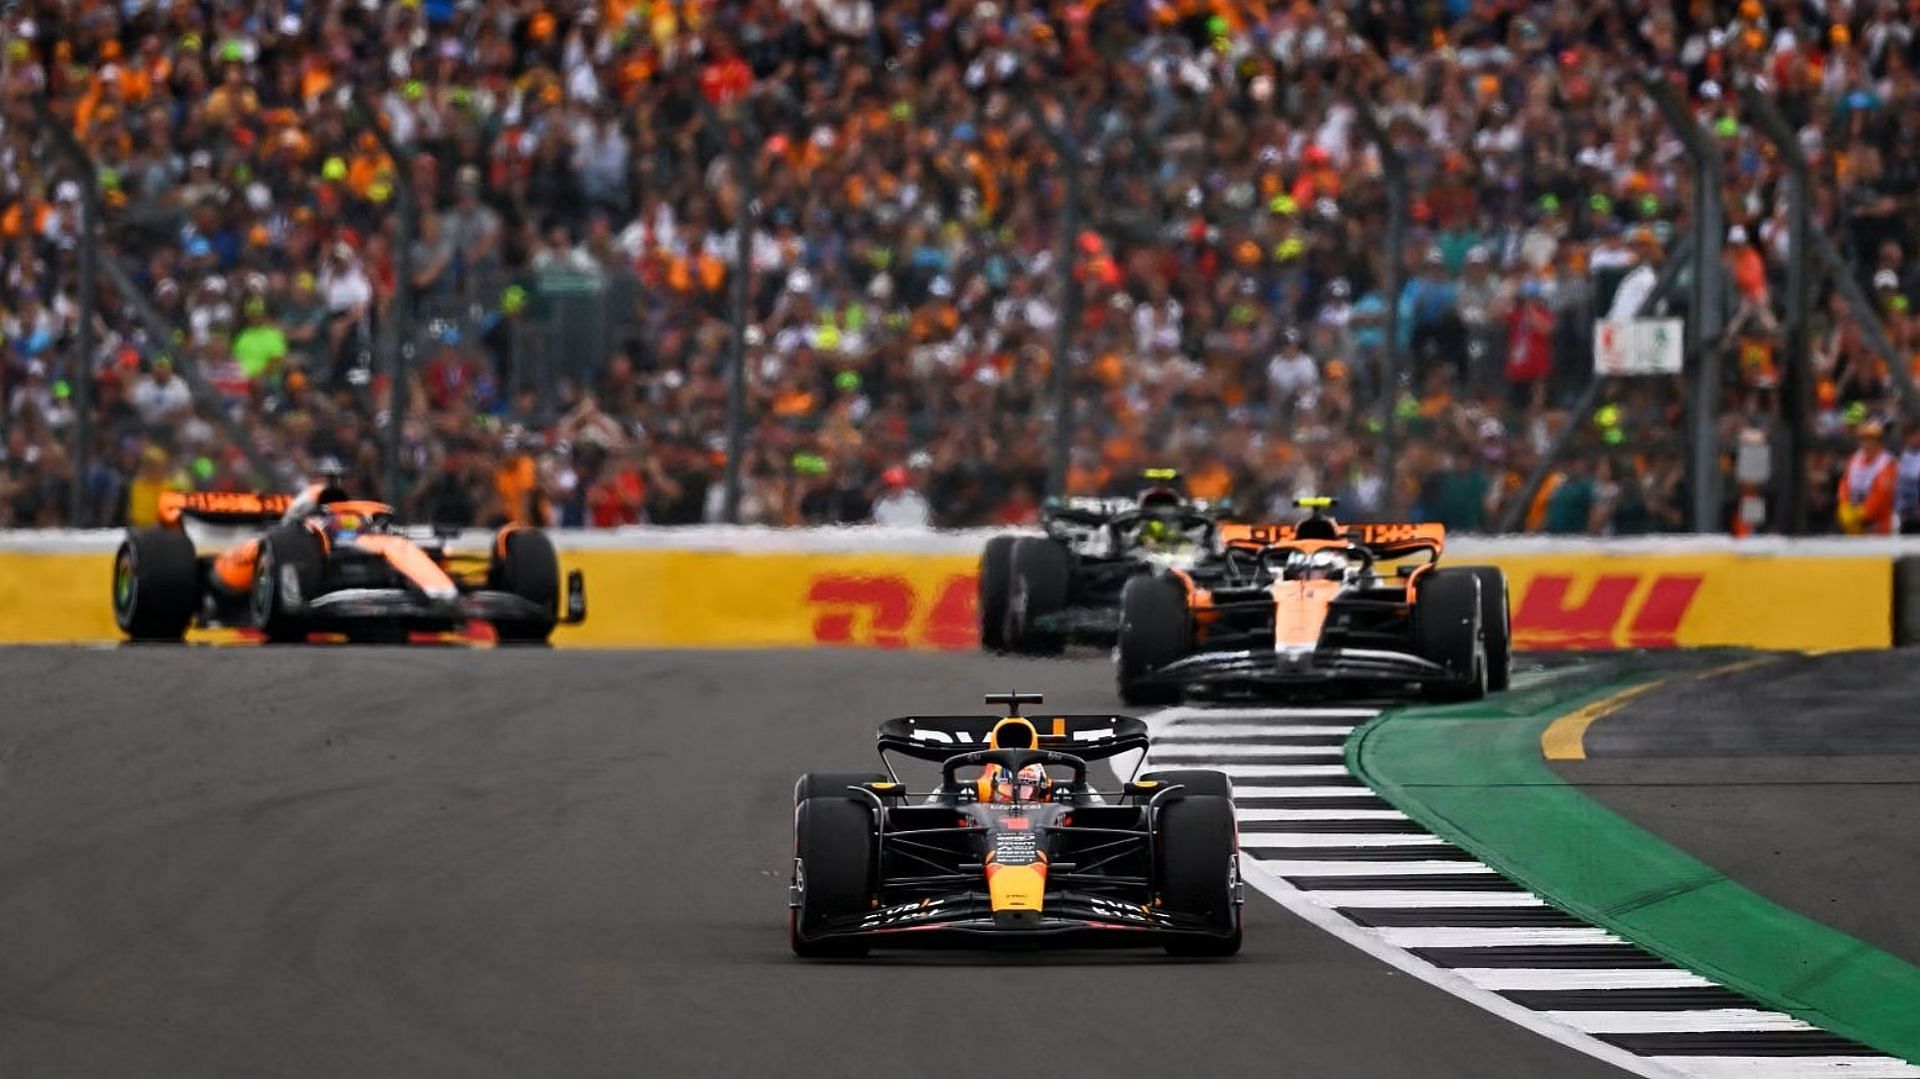 Max Verstappen (1) leads Lando Norris (4) and others during the 2023 F1 British Grand Prix. (Photo by Dan Mullan/Getty Images)